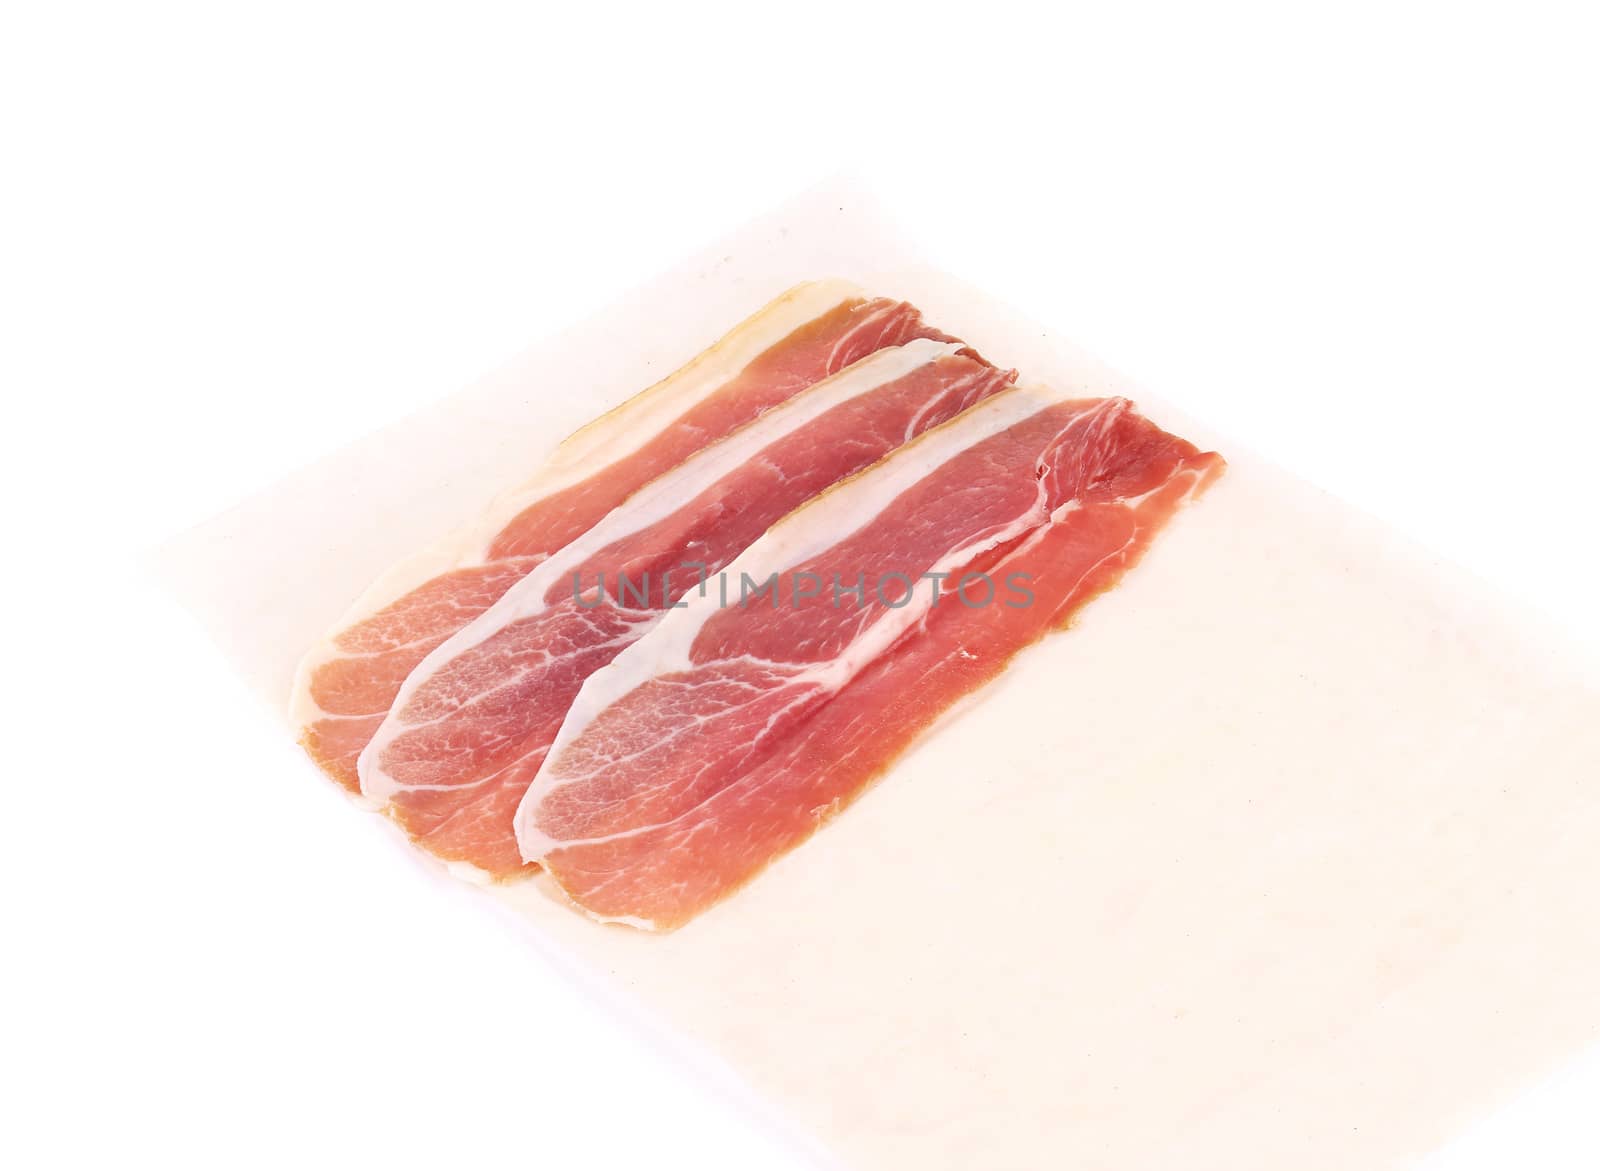 Slices of Delicious Prosciutto. Isolated on a white background.